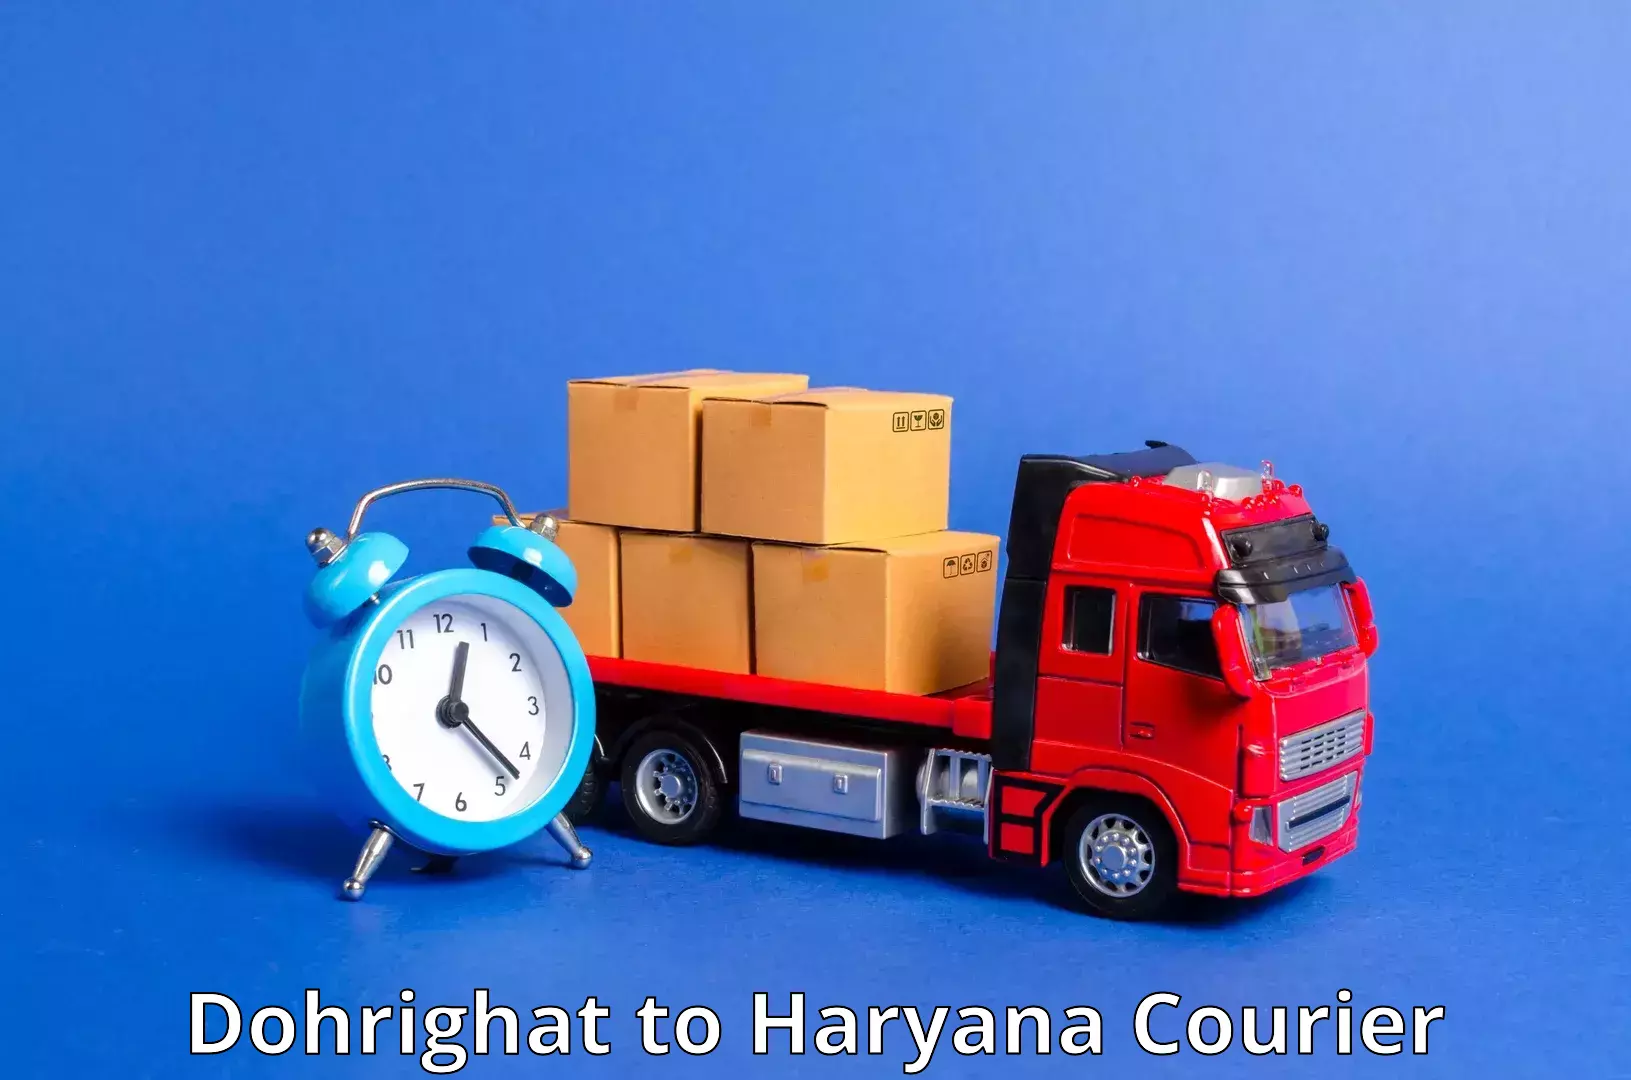 Global shipping networks Dohrighat to Mahendragarh